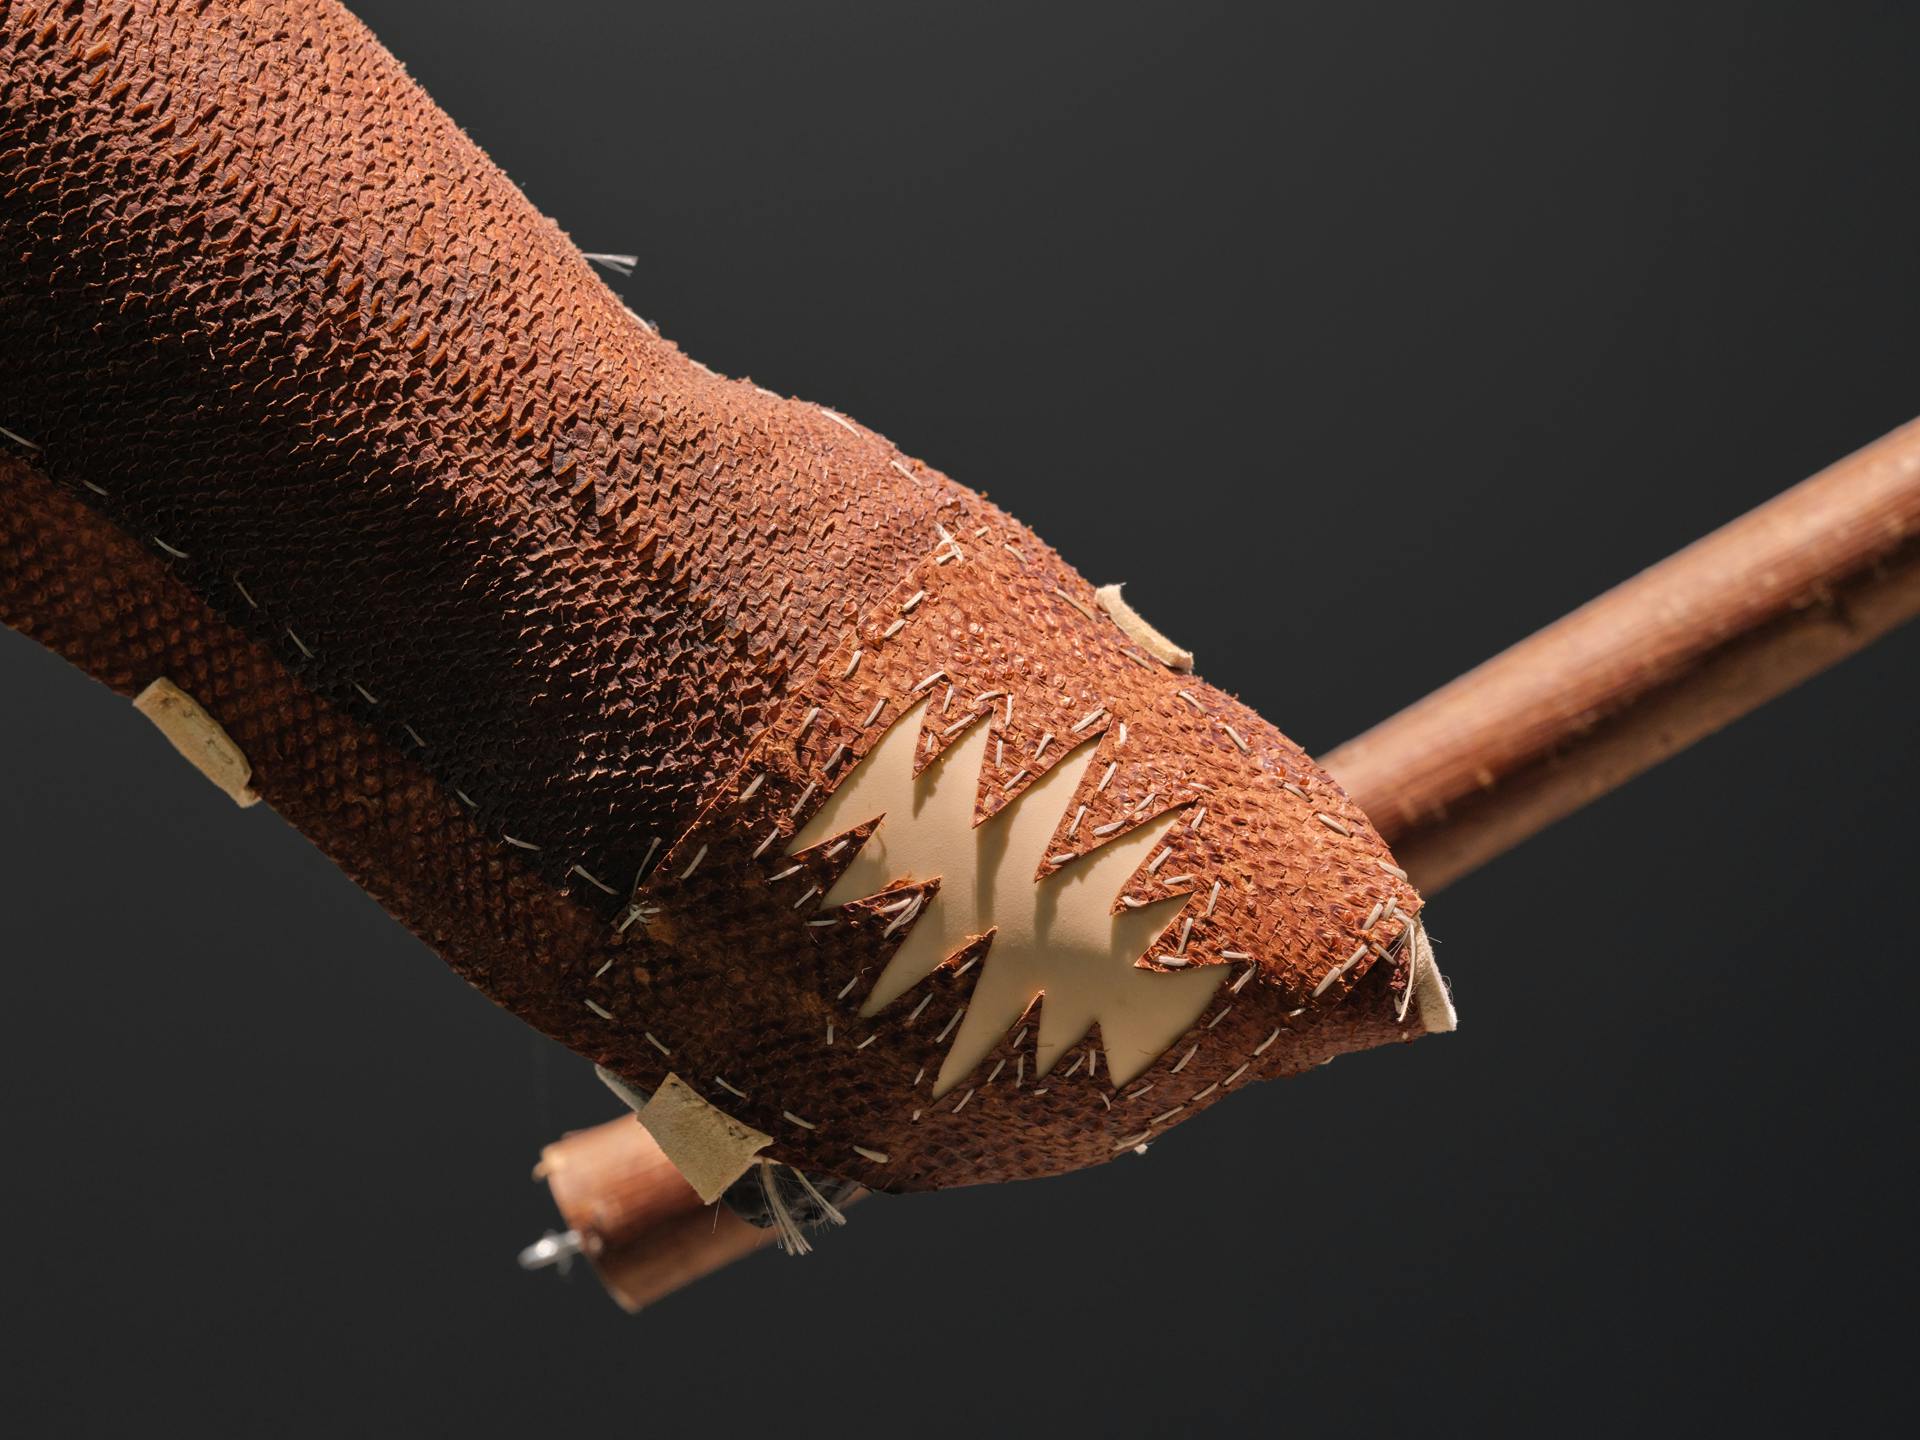 the bottom half of a fishskin leather arm cover, arranged to look as if it's holding a wooden shaft. the hand of the arm cover bears a zig-zag patterned shape. fish scales are visible in the texture of arm cover throughout.